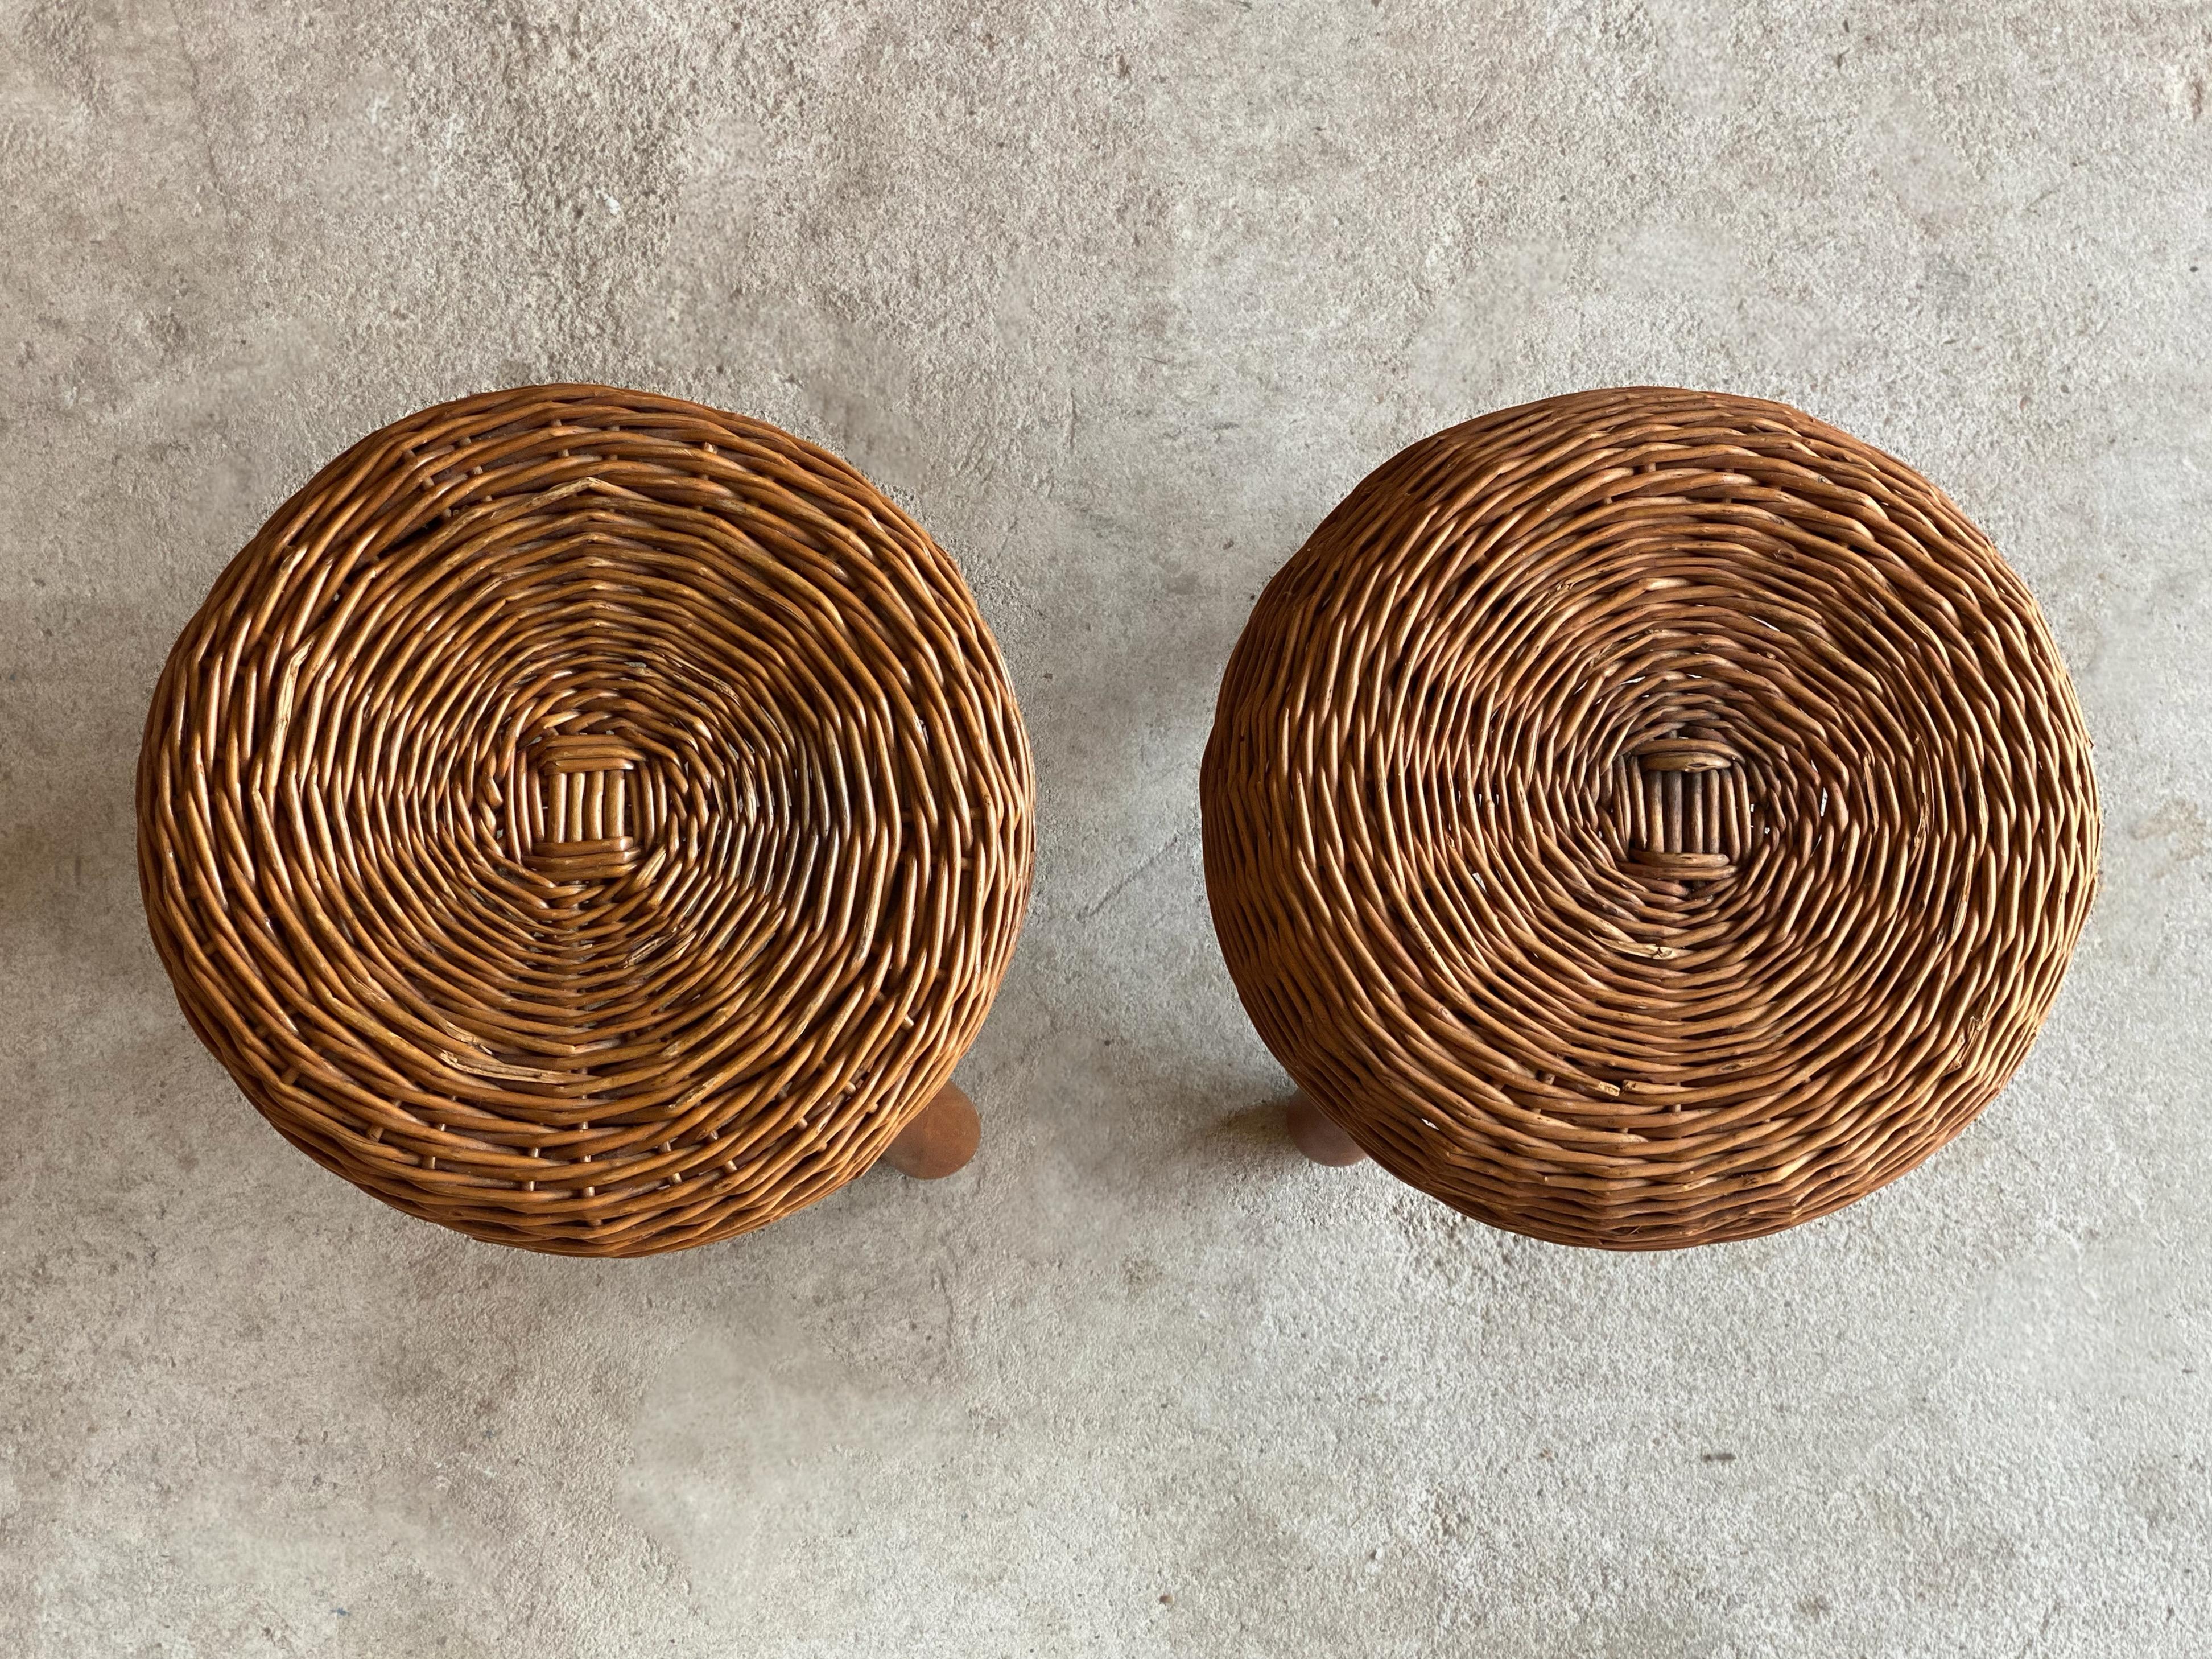 Carved Pair of Woven Rattan Stools Attributed to Tony Paul